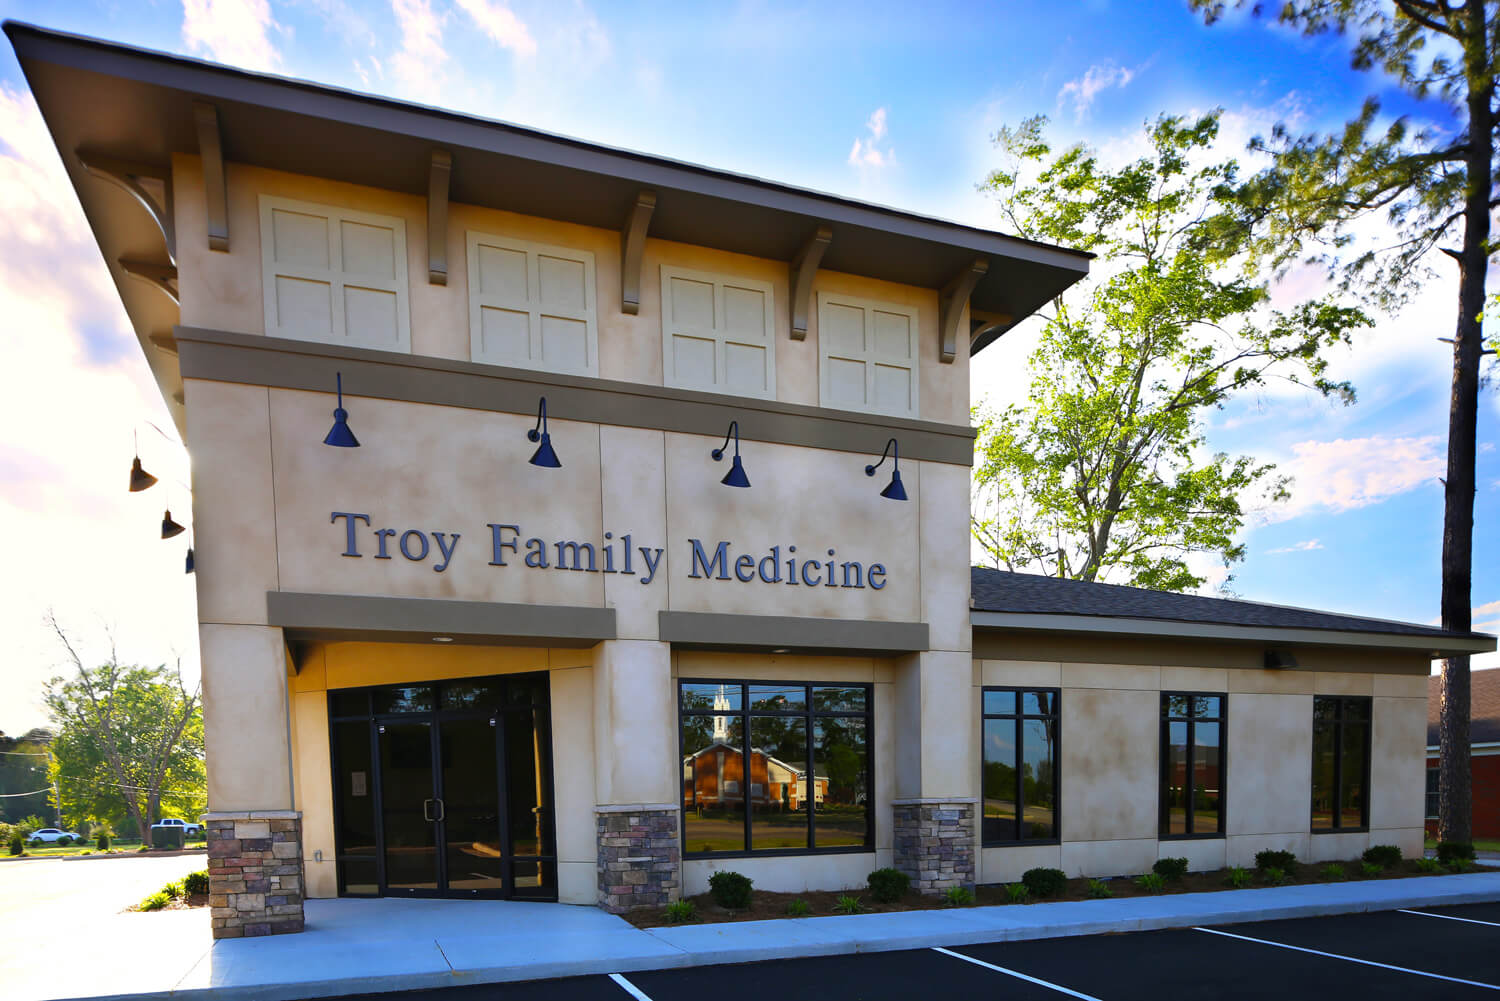 Troy Family Medicine Front Elevation - Designed by Foshee Architecture